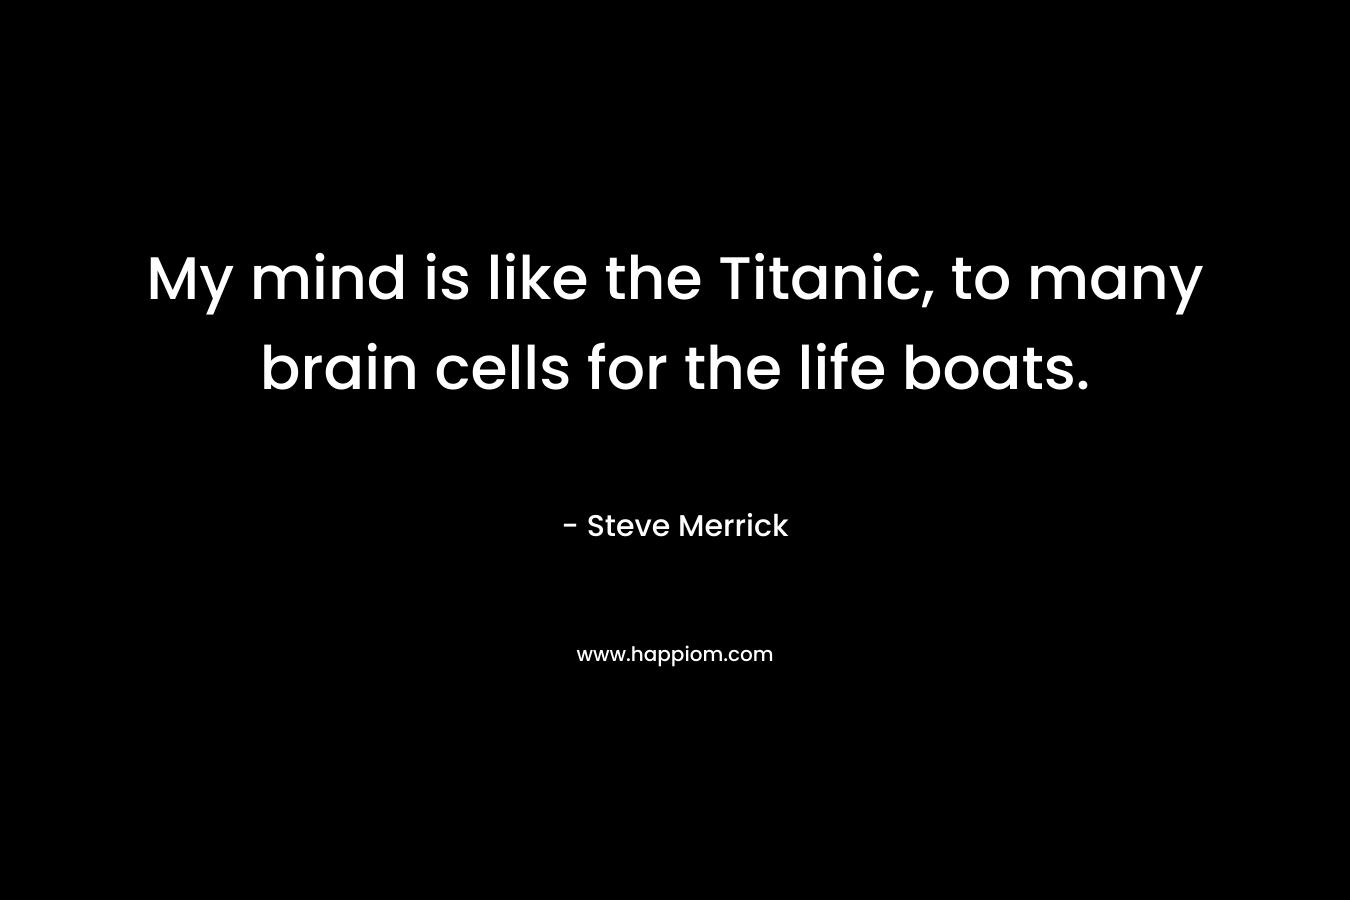 My mind is like the Titanic, to many brain cells for the life boats.